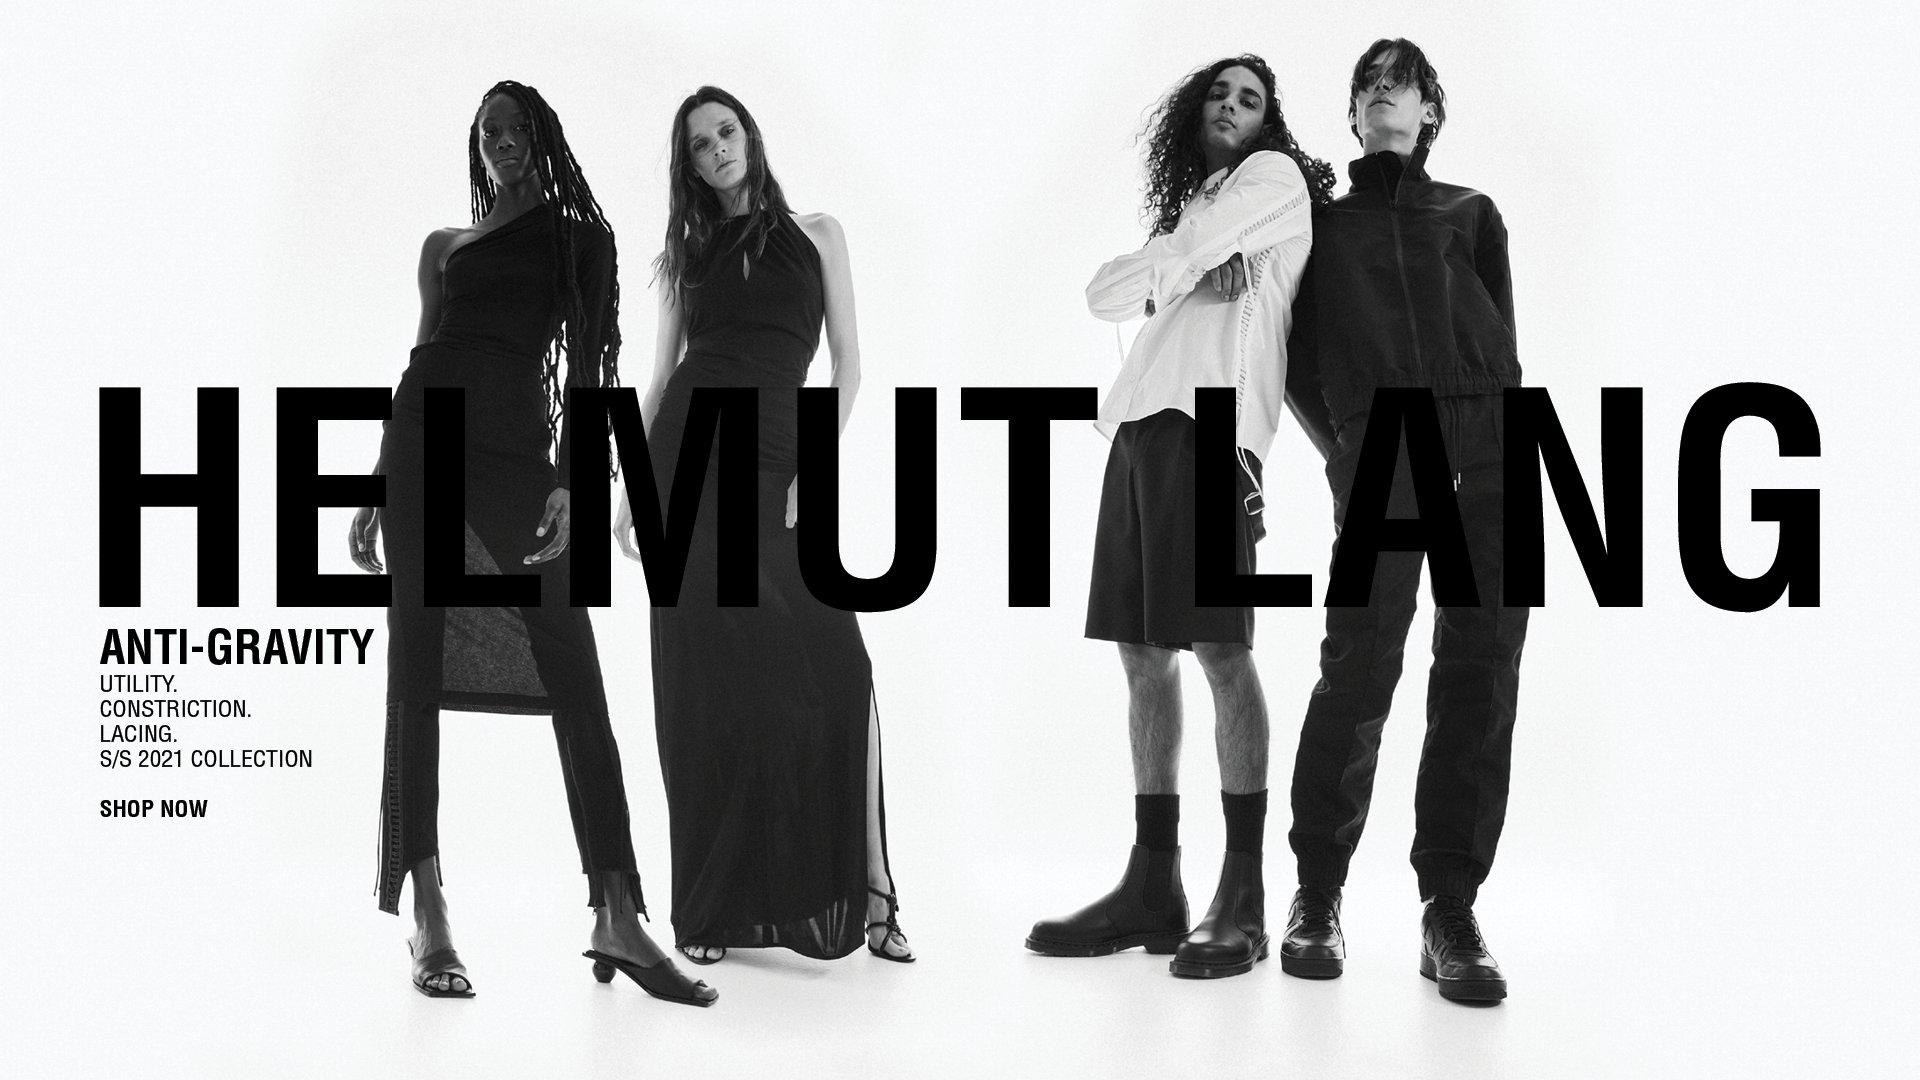 Www Helmutlang Com Finest Clothing And Luxury Goods For Women And Men